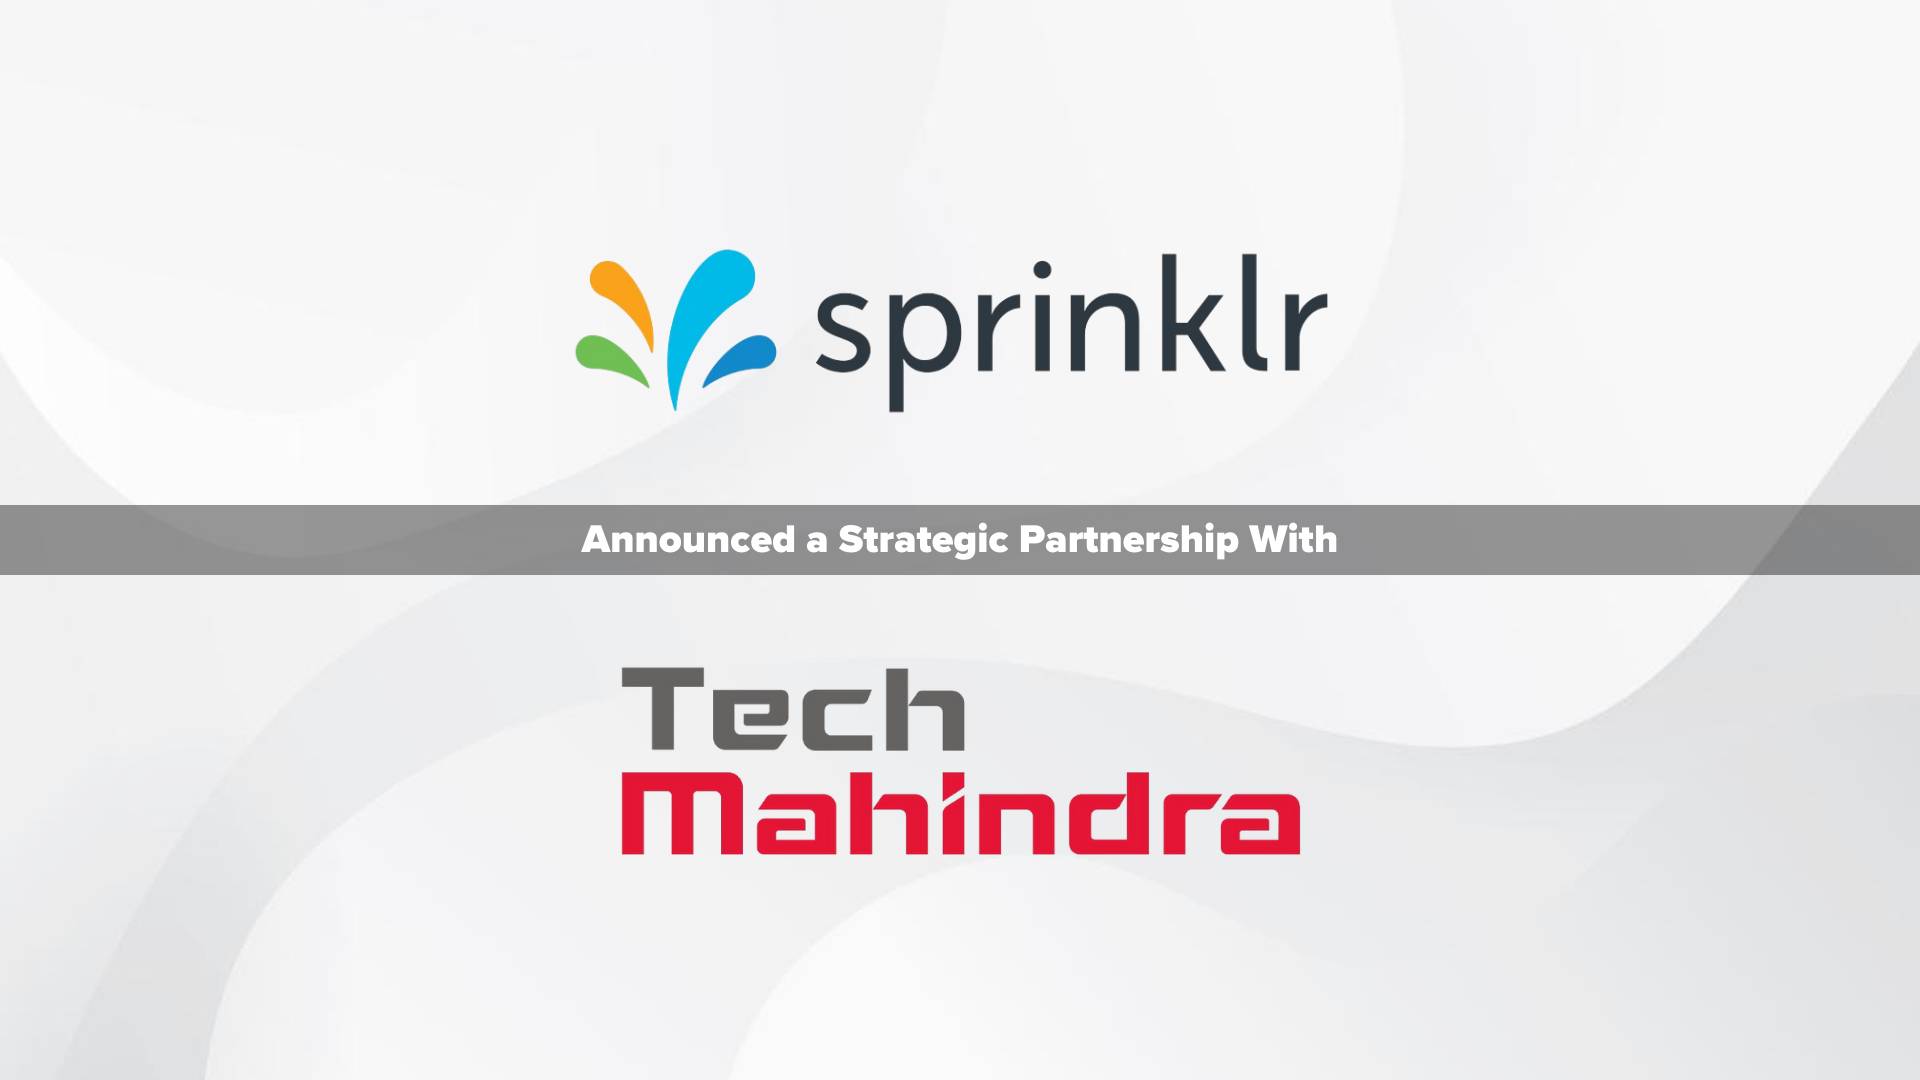 Tech Mahindra and Sprinklr Partner to Deliver AI-first Customer Experience Platform for Global Enterprise Front-Office Teams